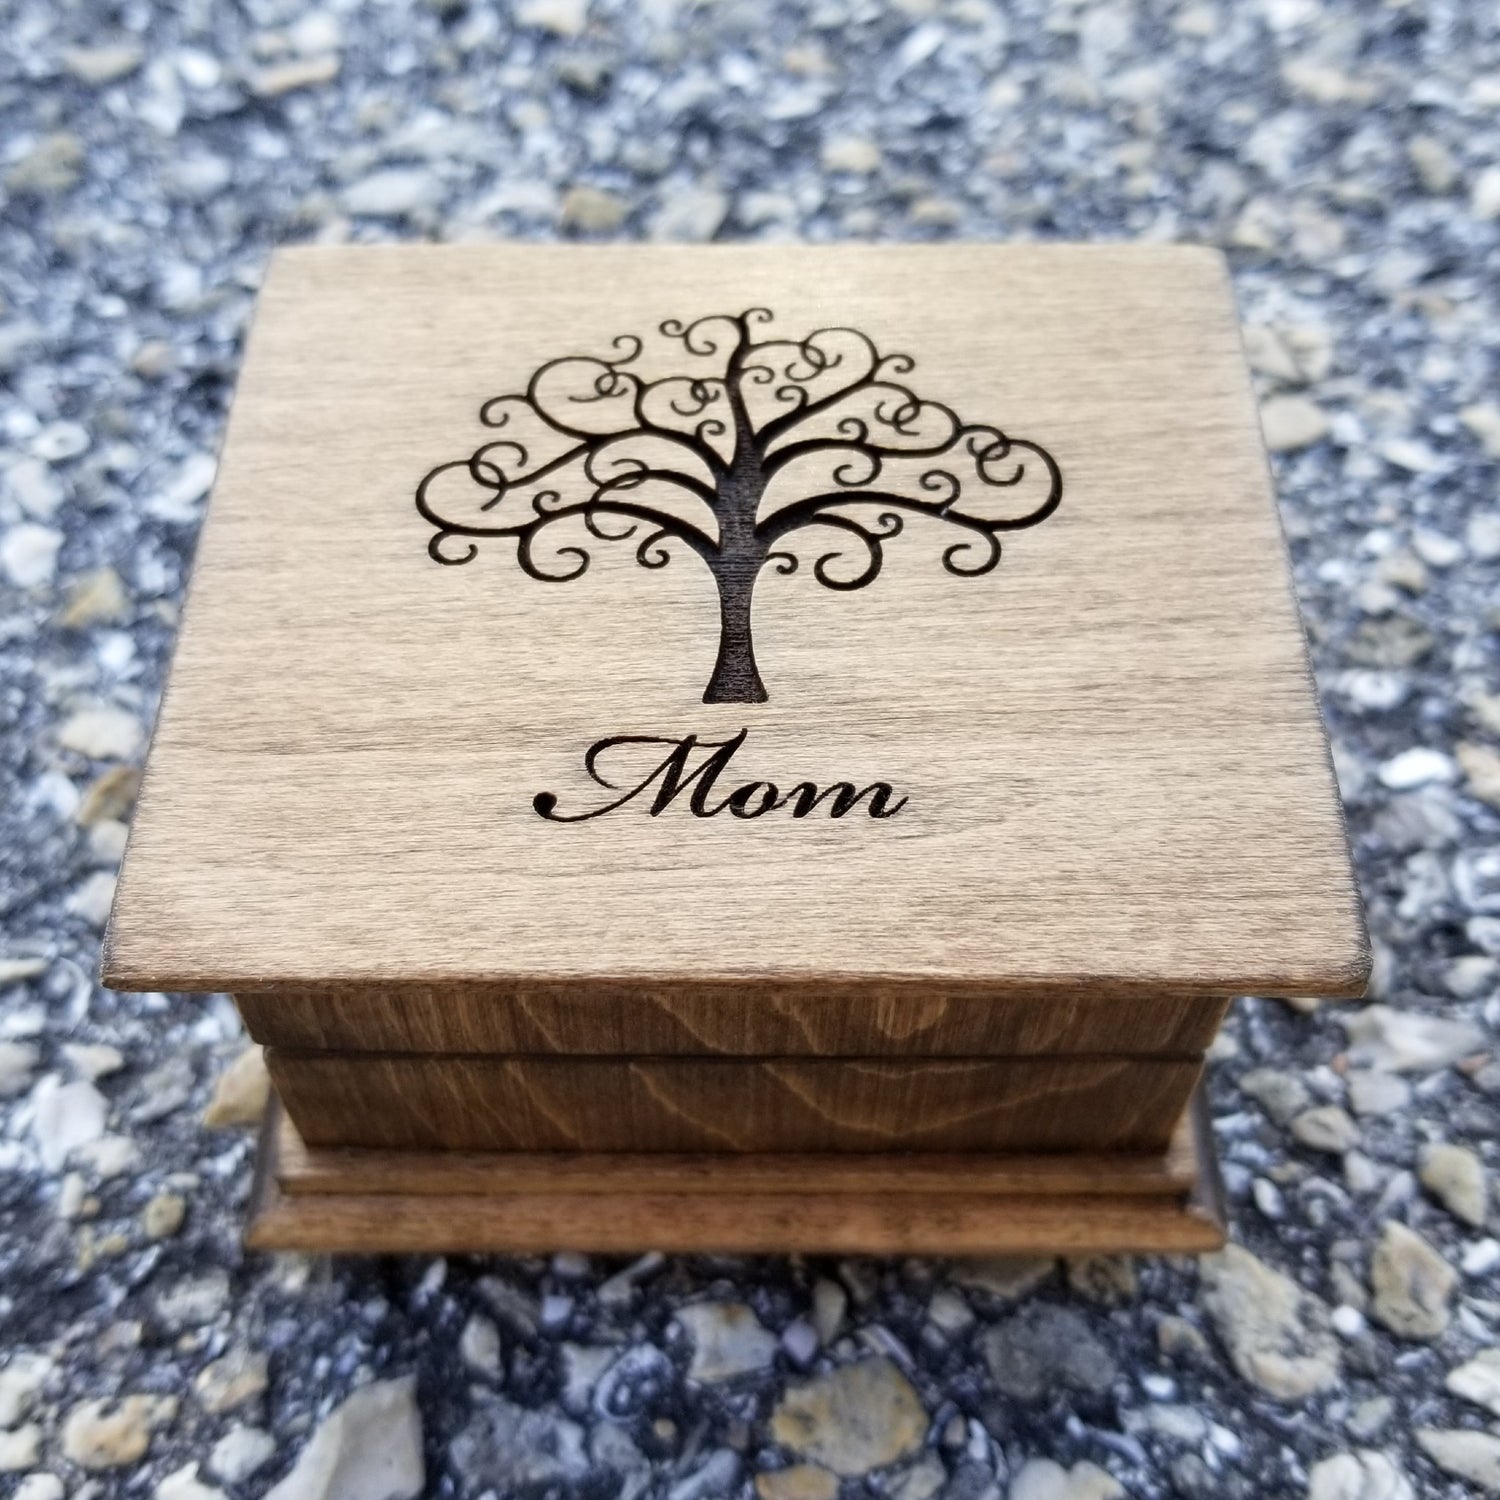 Music box with tree of life and Mom engraved on top, walnut music box